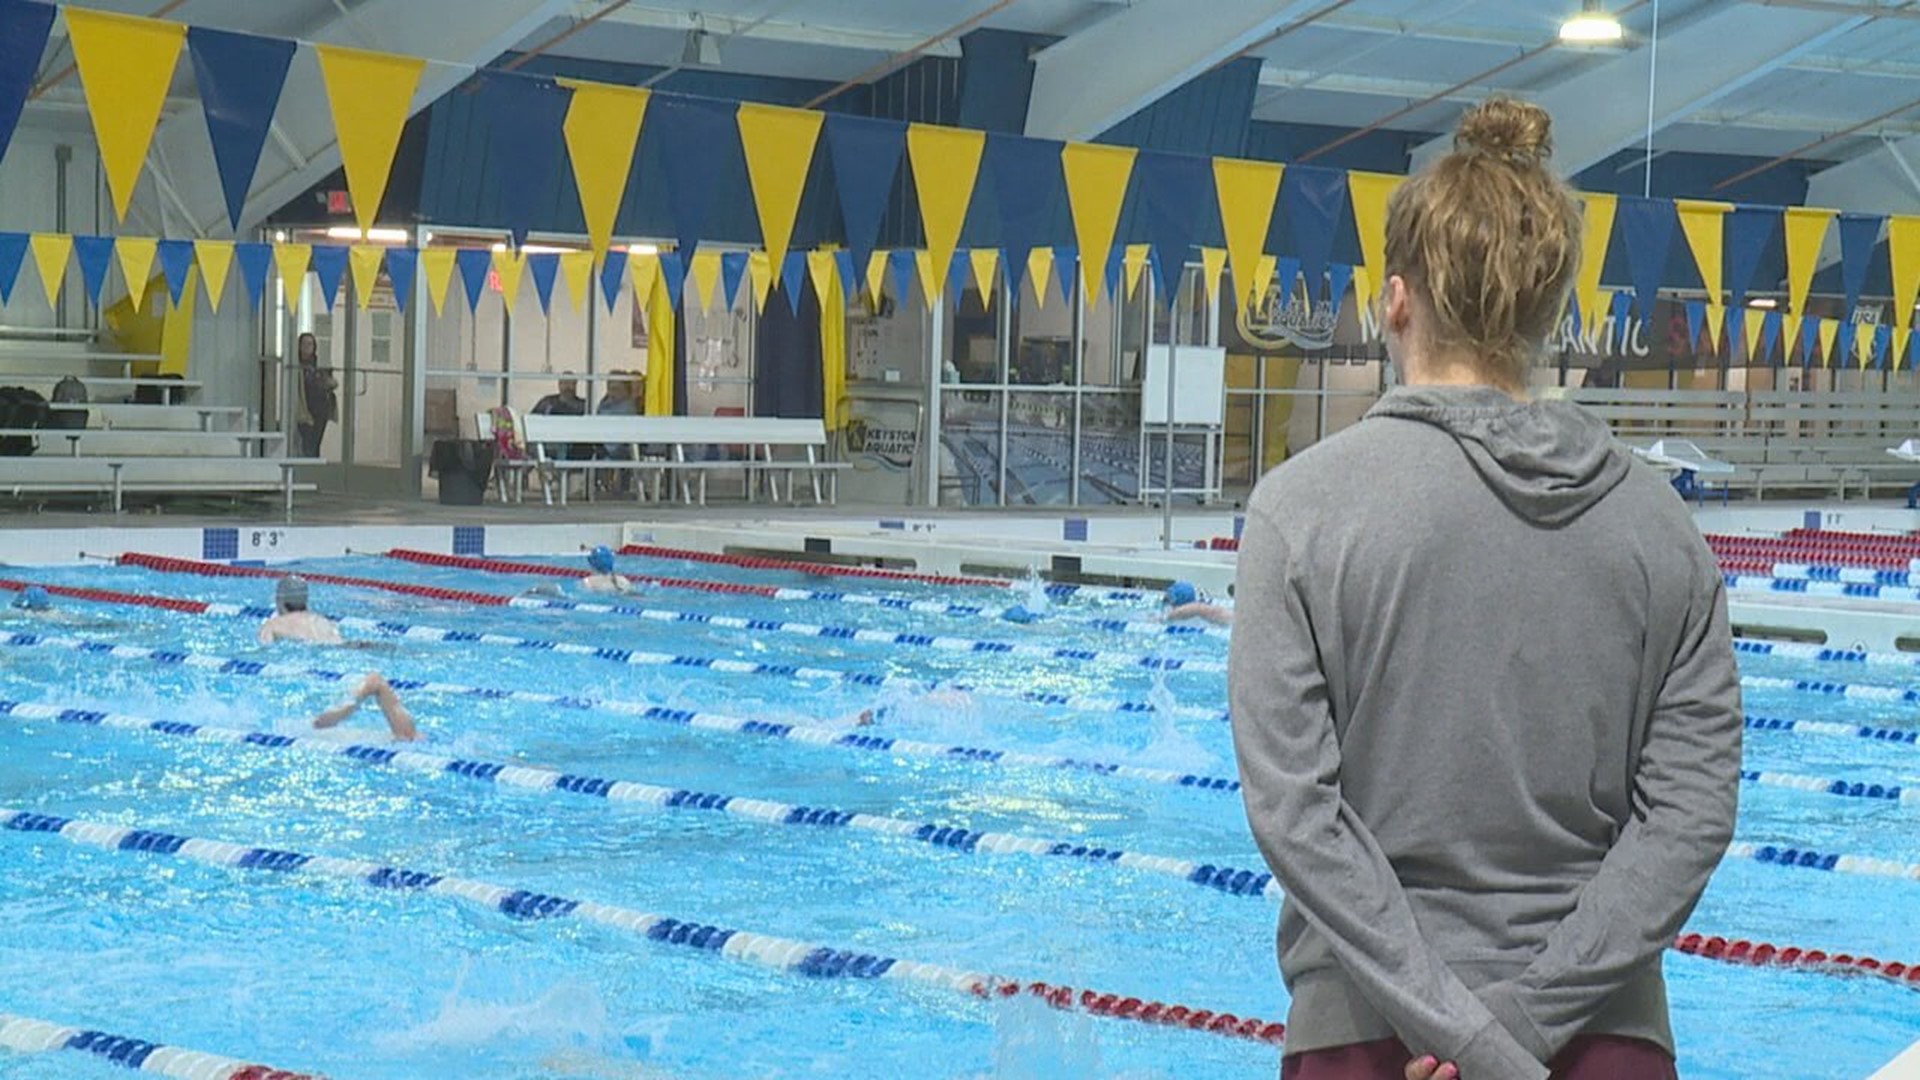 Cumberland County native Leah Gingrich talks about Keystone Aquatic's college recruitment event and gives advice to high school swimmers taking the next step.